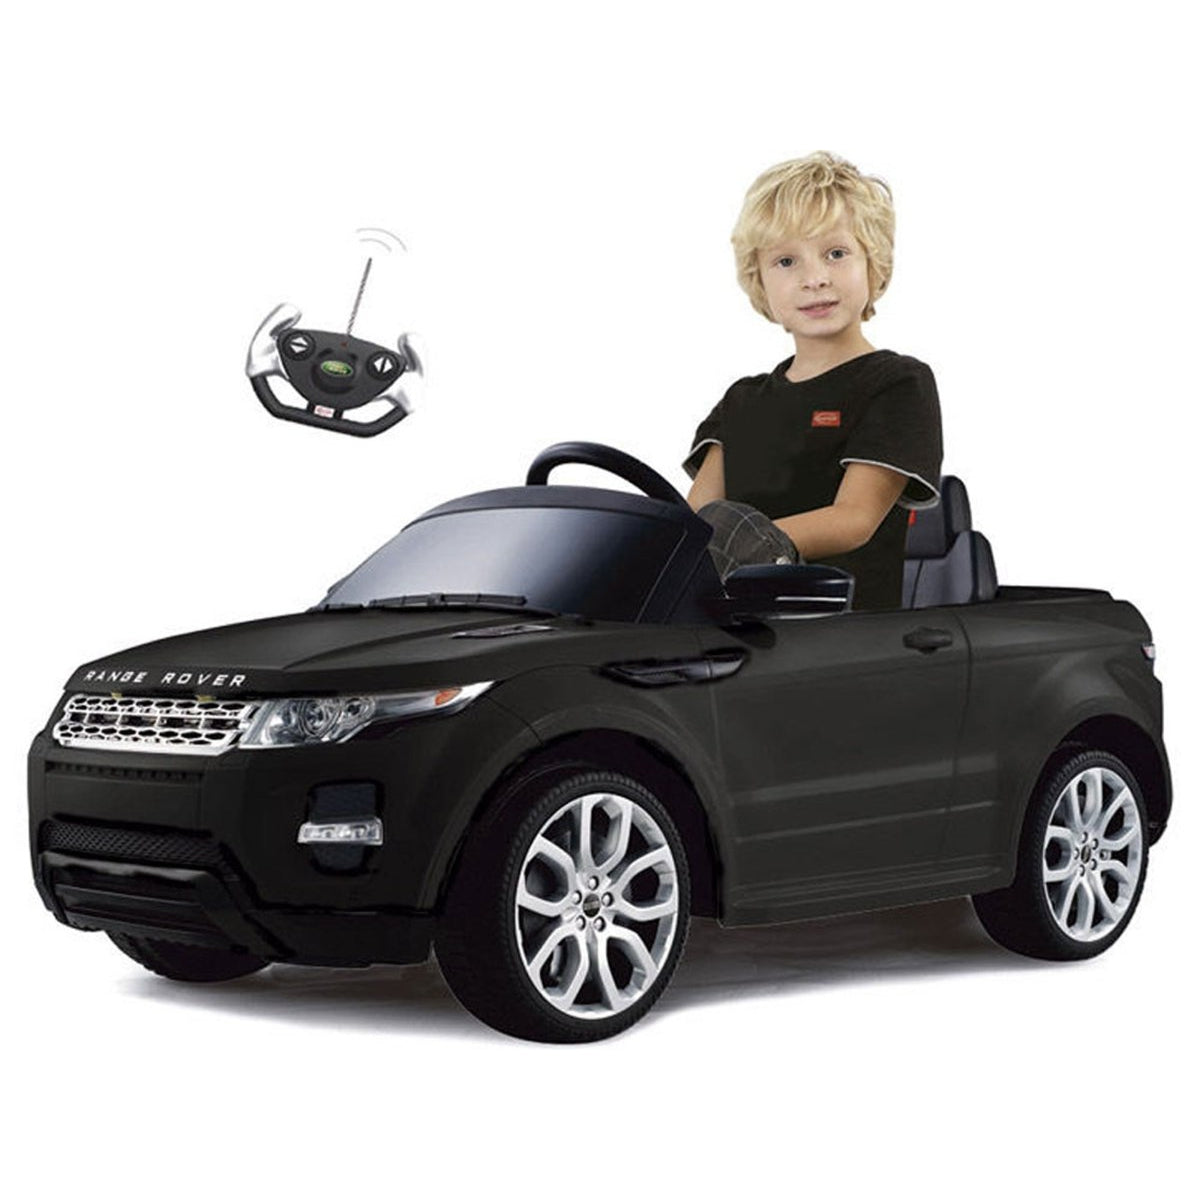 RASTAR Land Rover Evoque 12v Black Kids Ride On Toy Remote Controlled - Ebikecentric